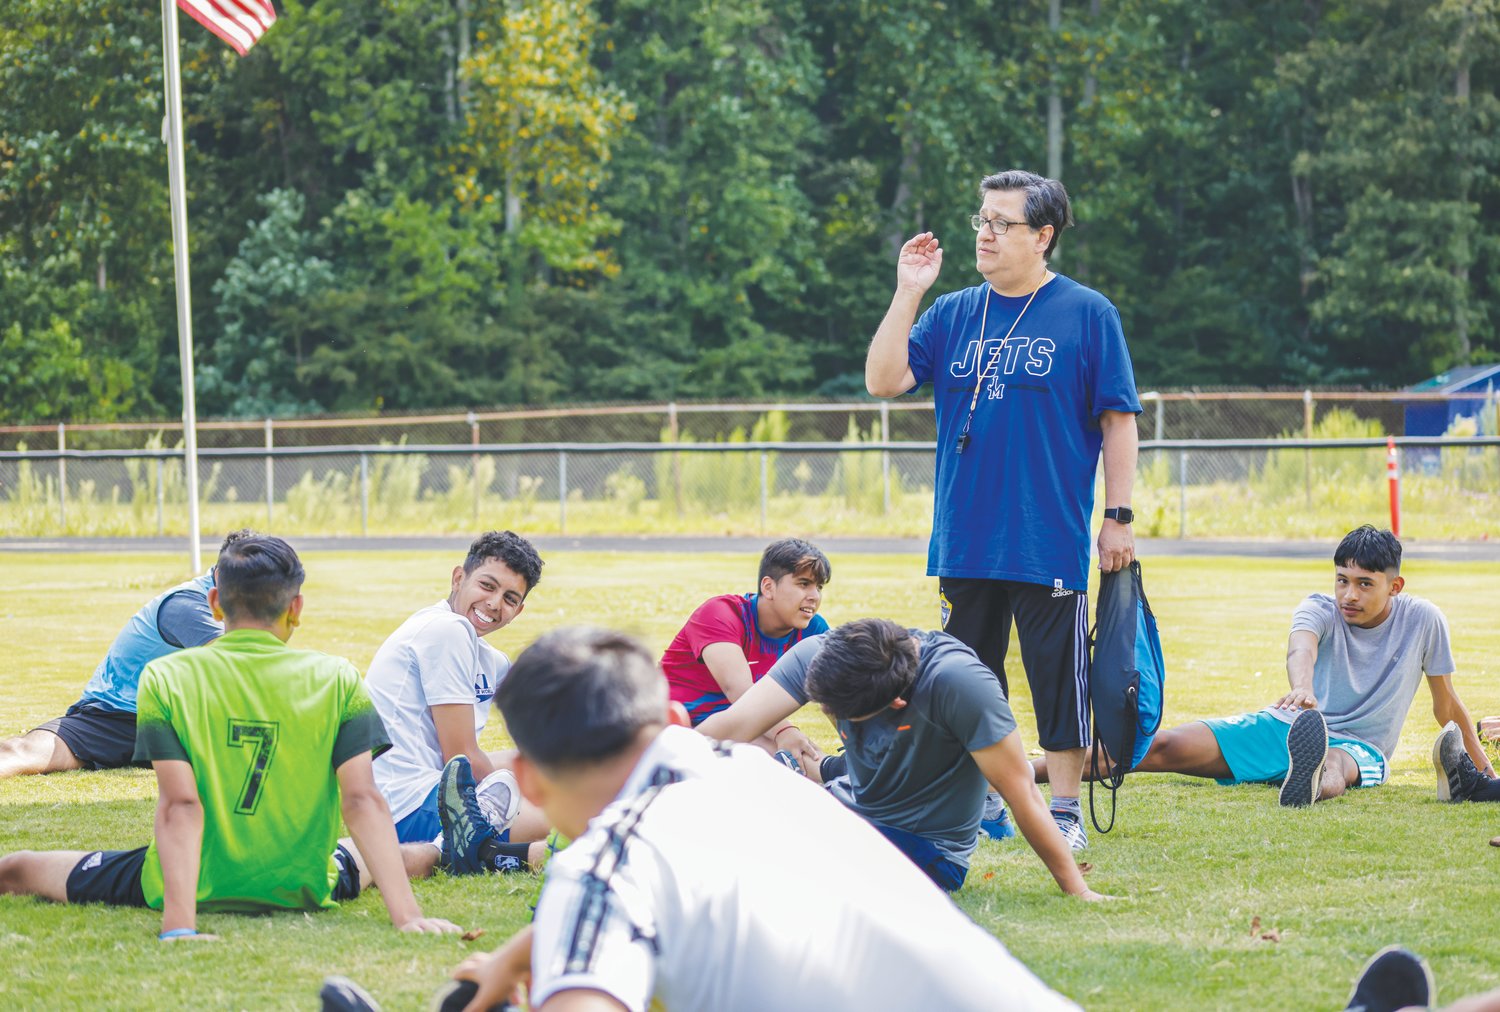 Jordan-Matthews head soccer coach Paul Cuadros gives instruction to his team during a workout.